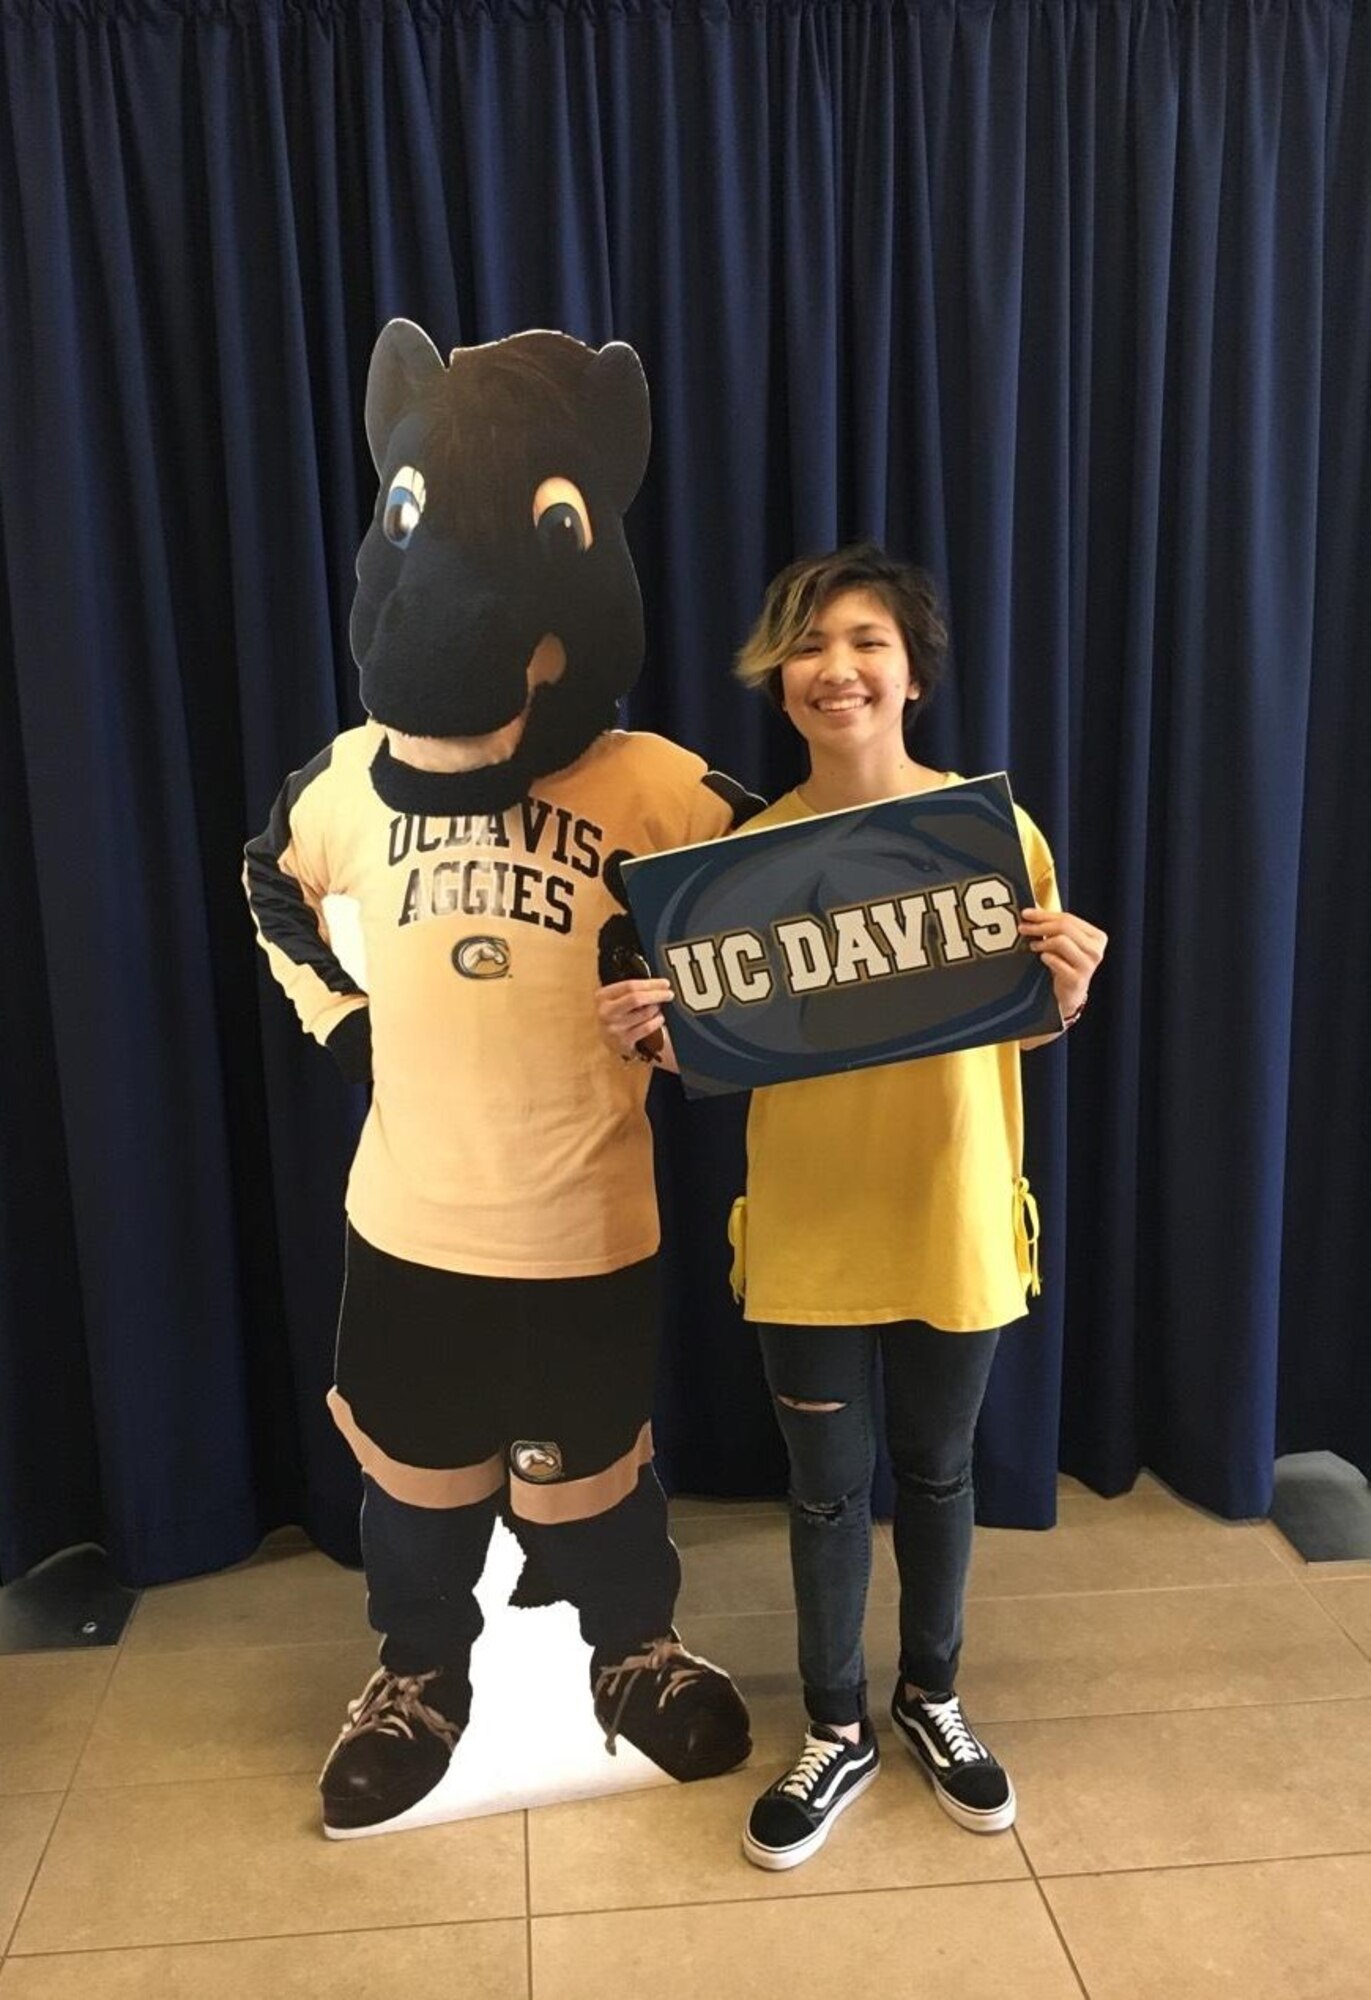 Corvias Foundation scholarship recipient, Zoexenita Mercado of Desert High School on Edwards Air Force Base, poses for a photo with at University of California, Davis mascot cutout. She plans to attend the university and be a surgeon in the future. (Courtesy photo)